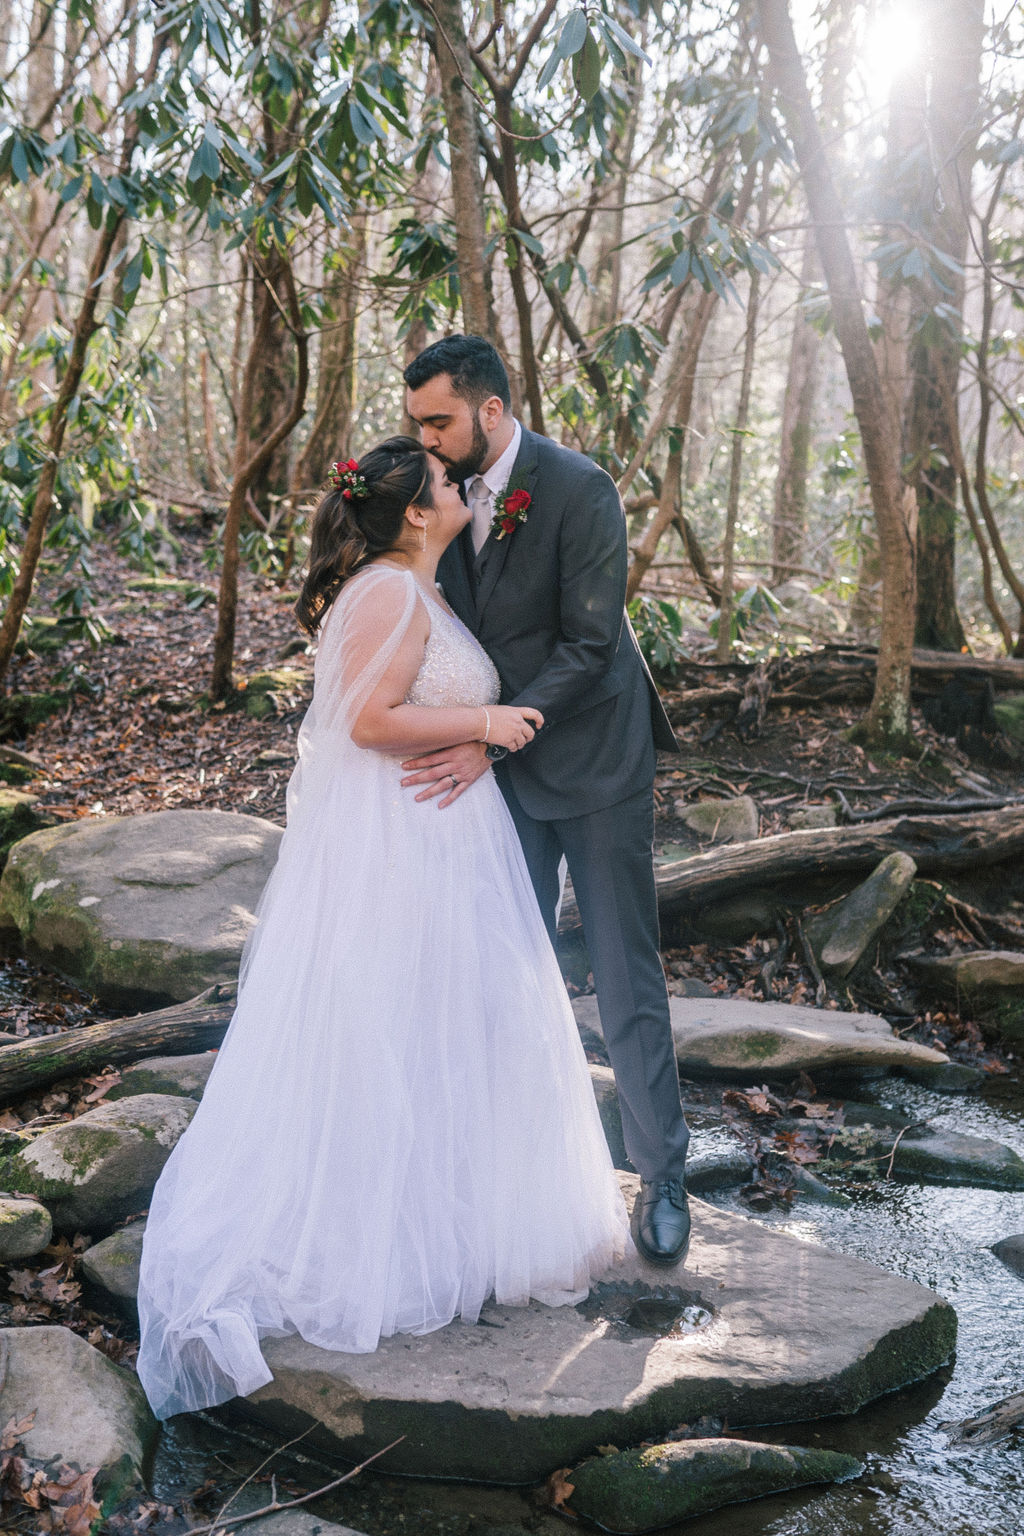 groom kissing his bride on the forehead as they standin gin a stream on their wedding day in smokies.